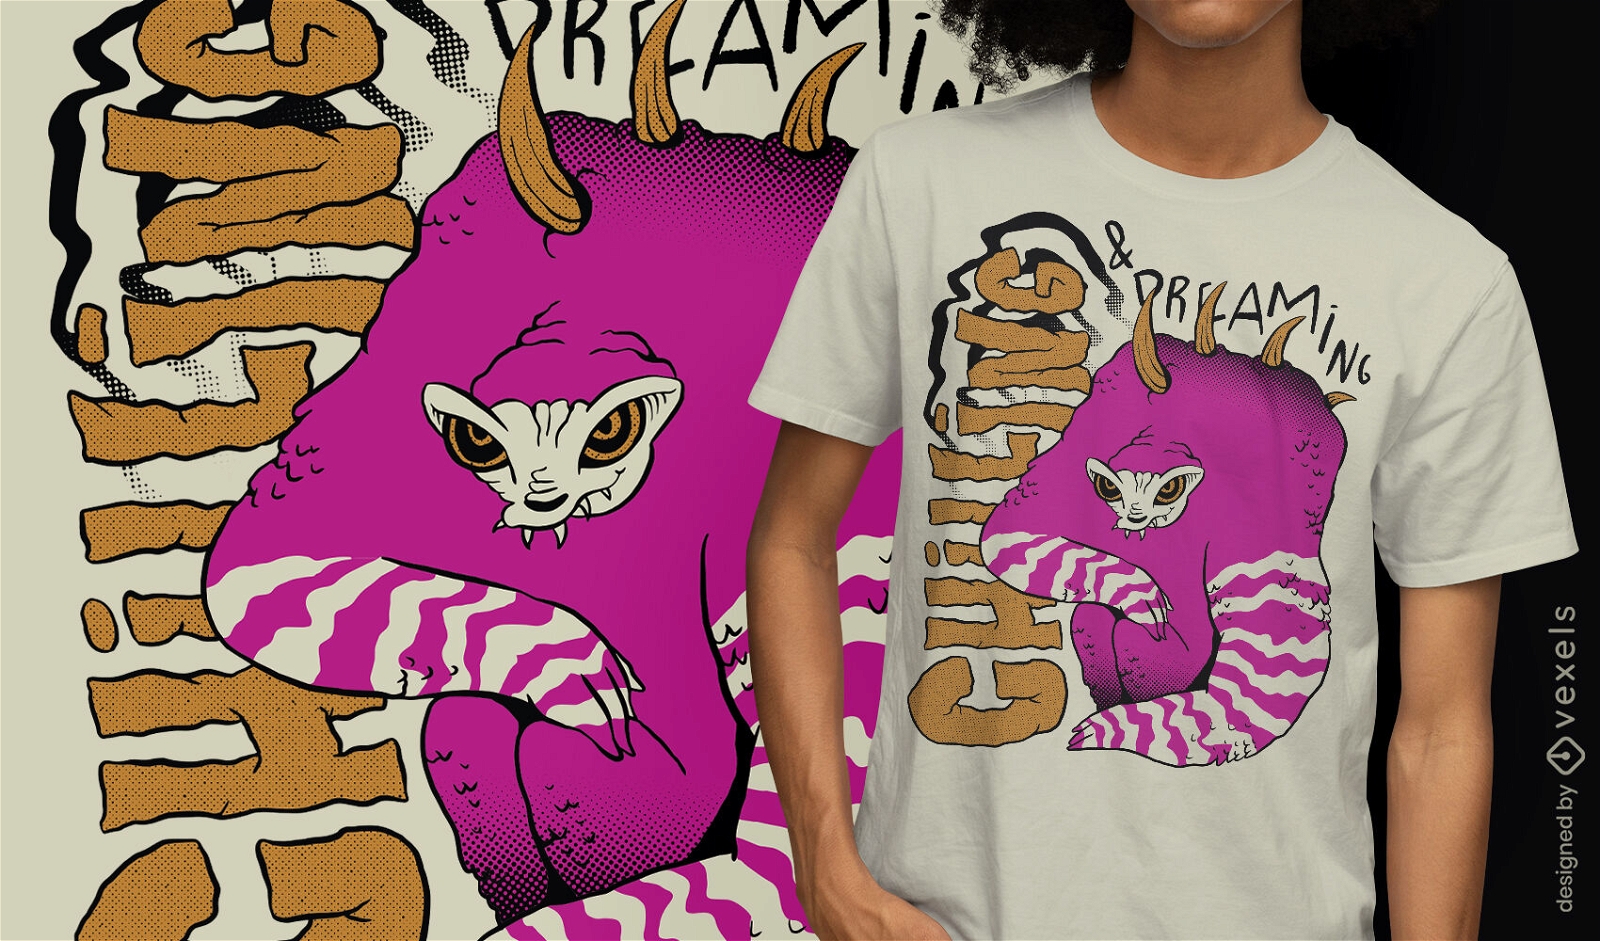 Chilling quote trippy monster t-shirt design